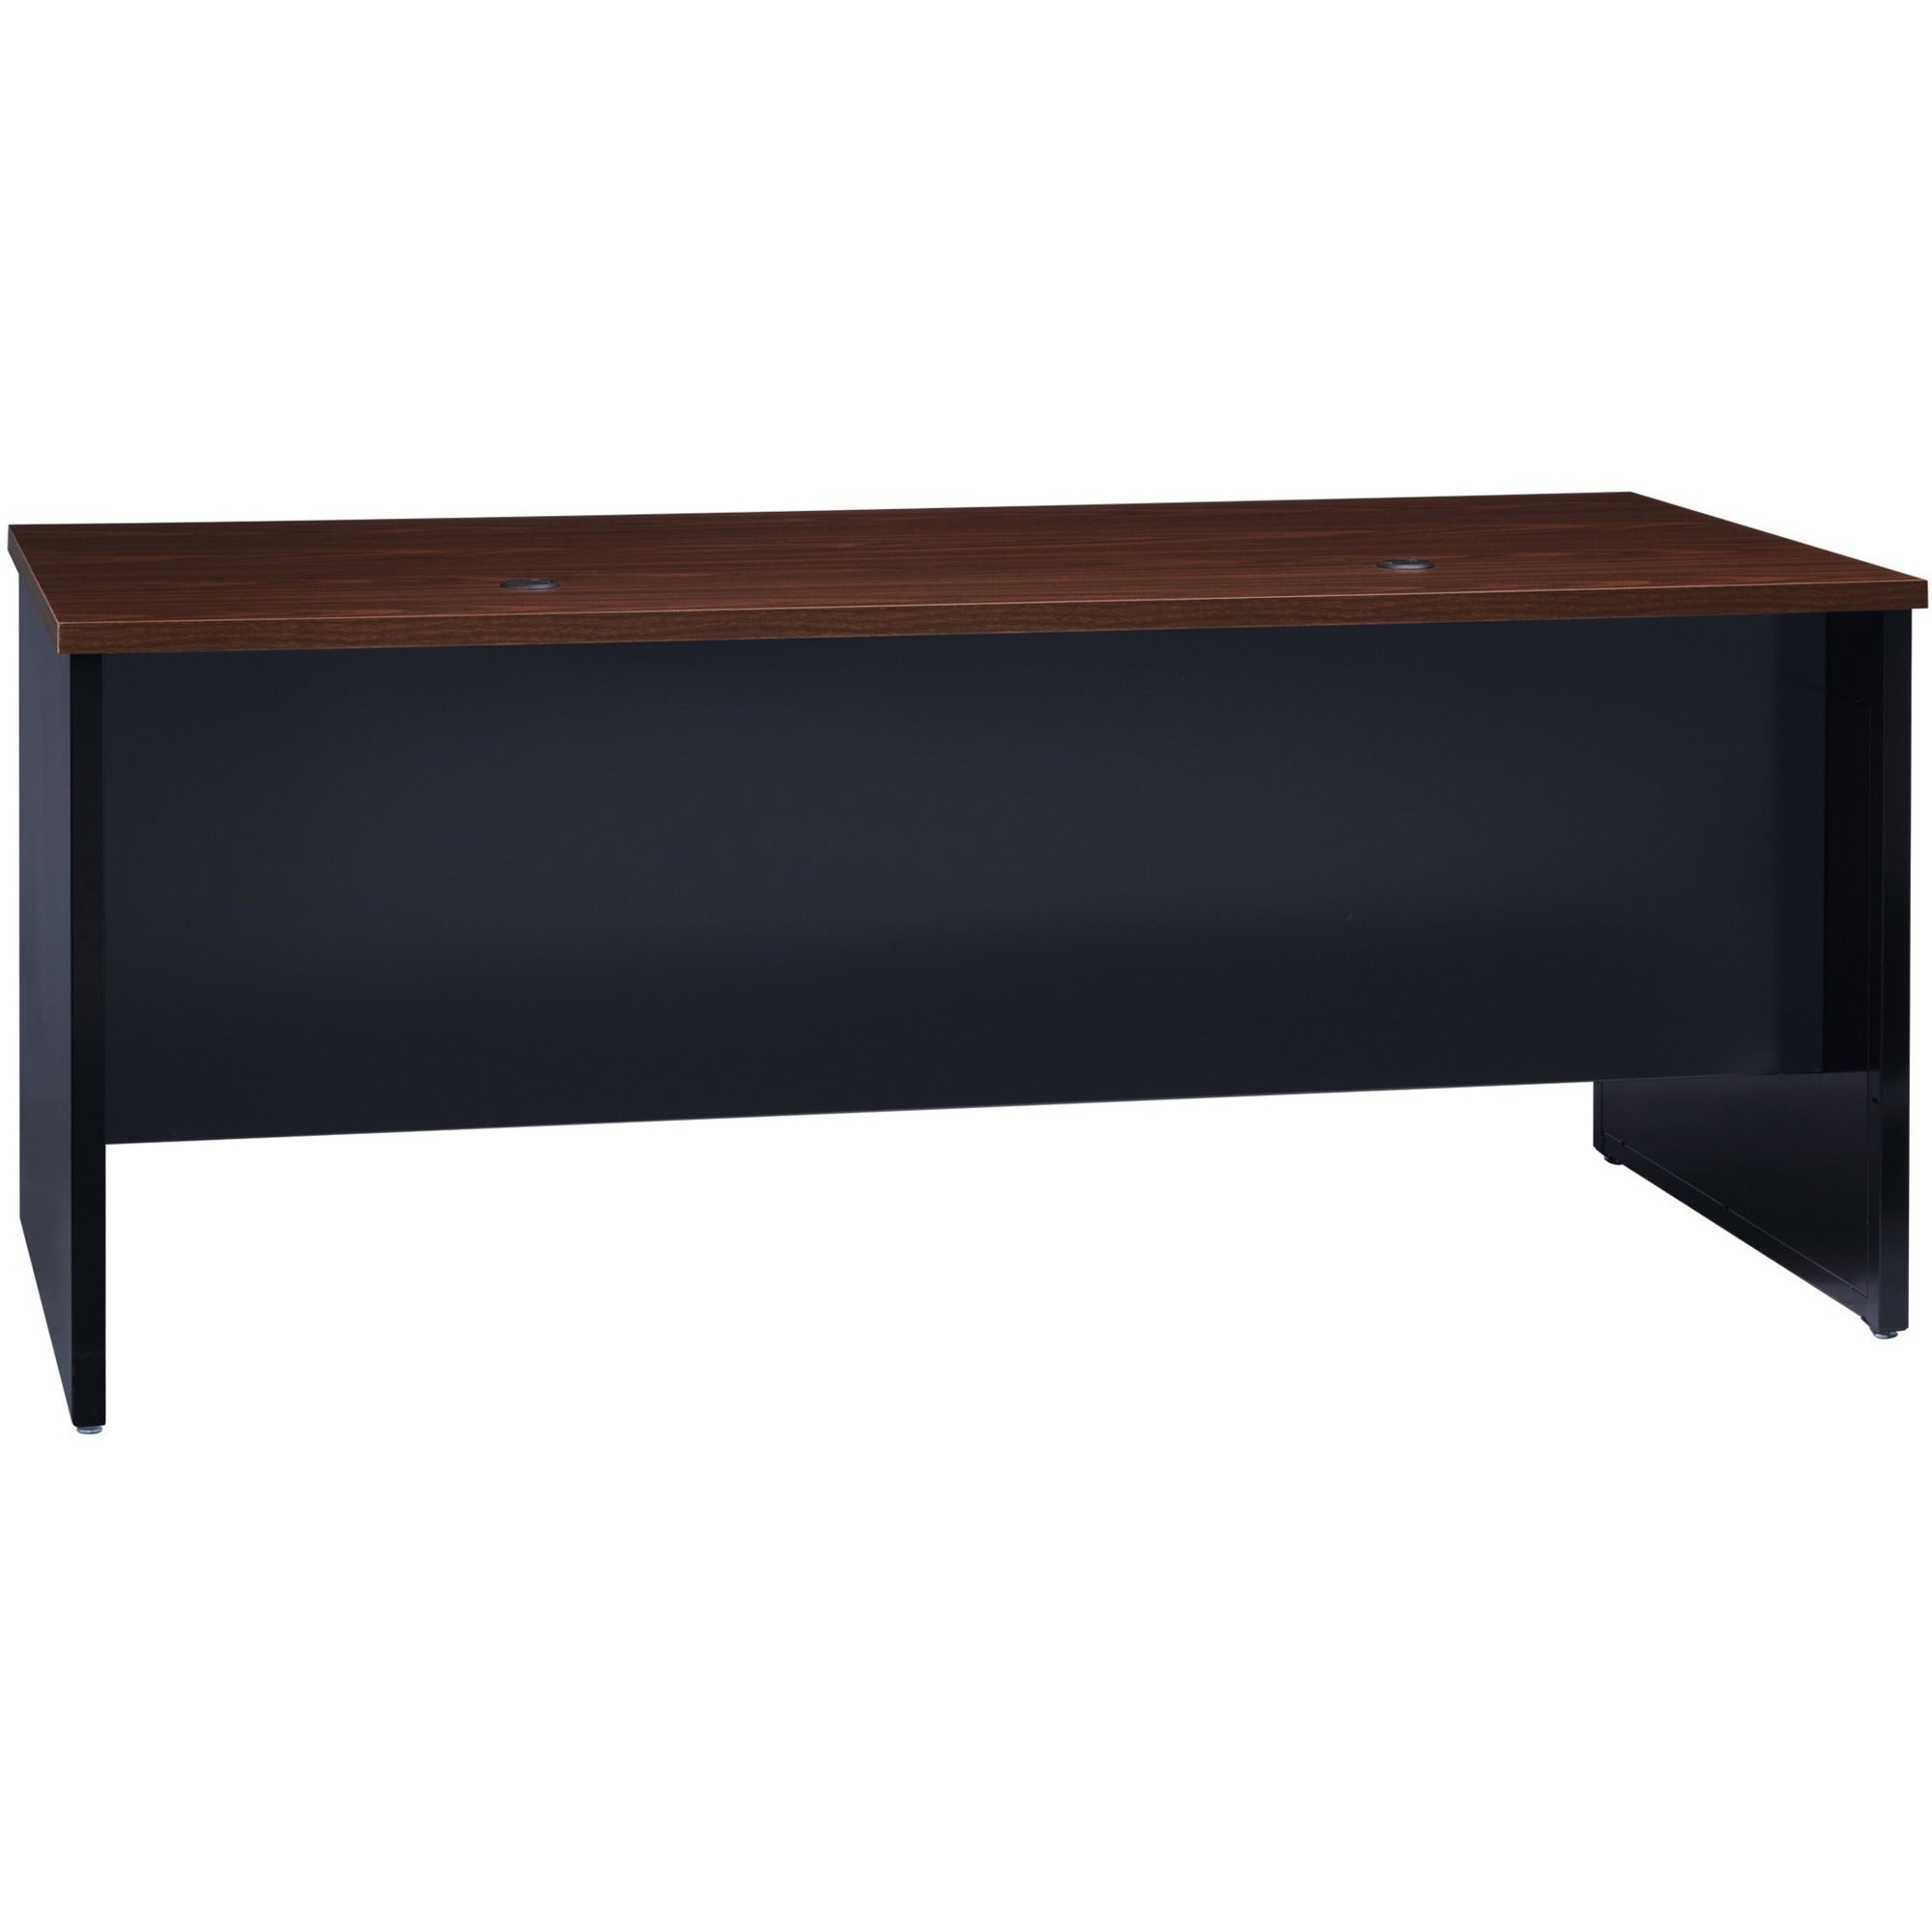 Lorell Fortress Modular Series Desk - 72" x 36" , 1.1" Top - 2 x Box, File Drawer(s) - Single Pedestal on Left Side - Material: Steel - Finish: Walnut Laminate, Black - Scratch Resistant, Stain Resistant, Ball-bearing Suspension, Grommet, Handle, Cor - 1